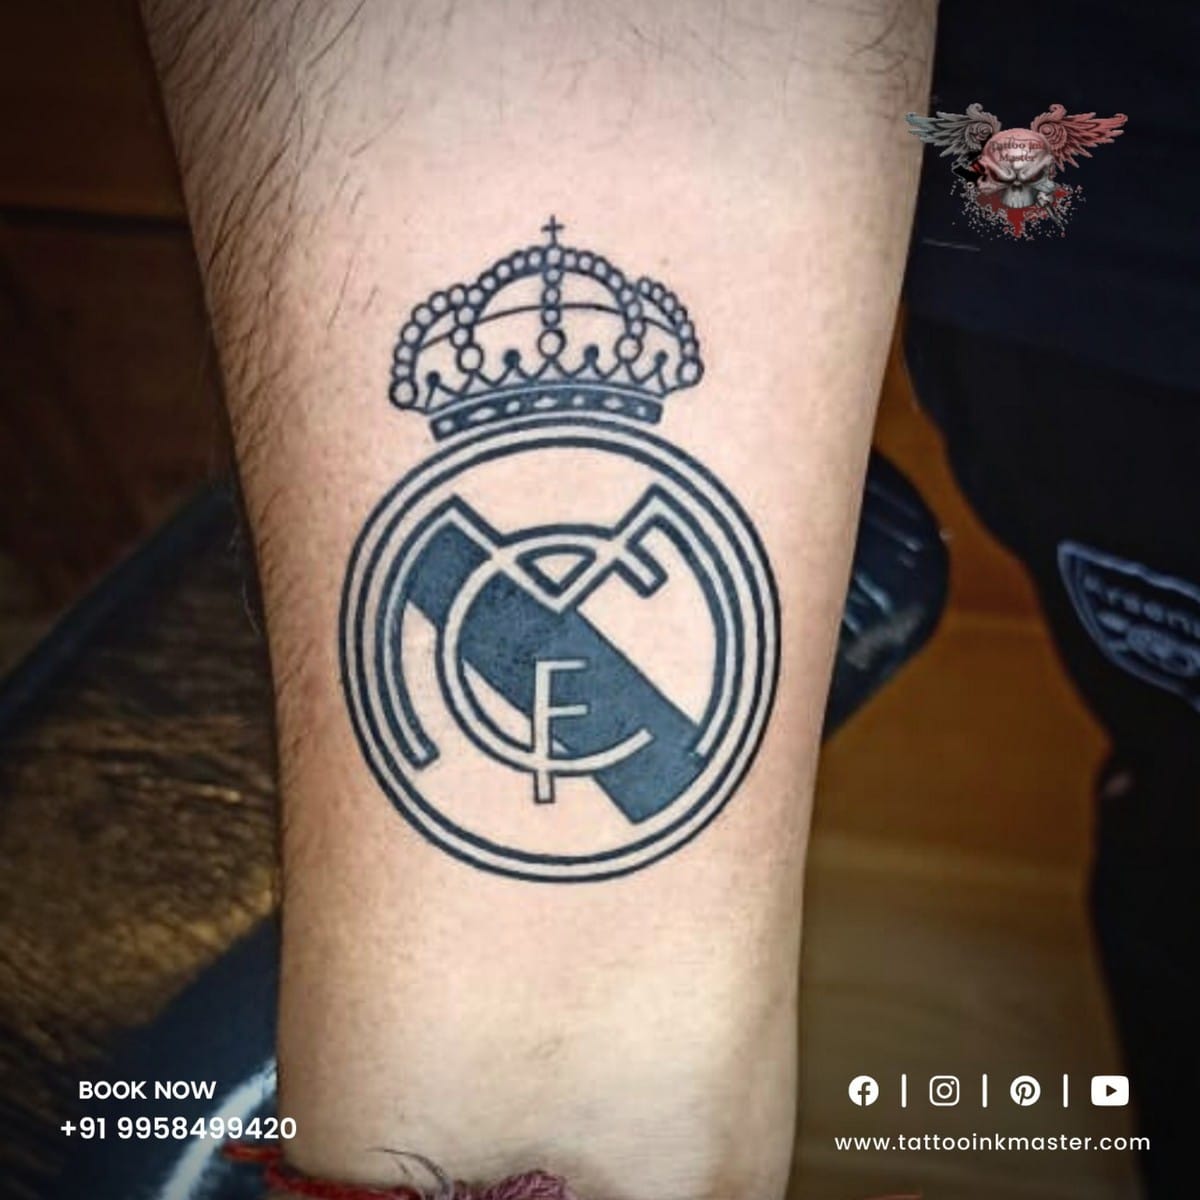 soccer tattoos even tattoos donned by the favorite soccer player | Soccer  tattoos, Tattoo designs, Star tattoo designs